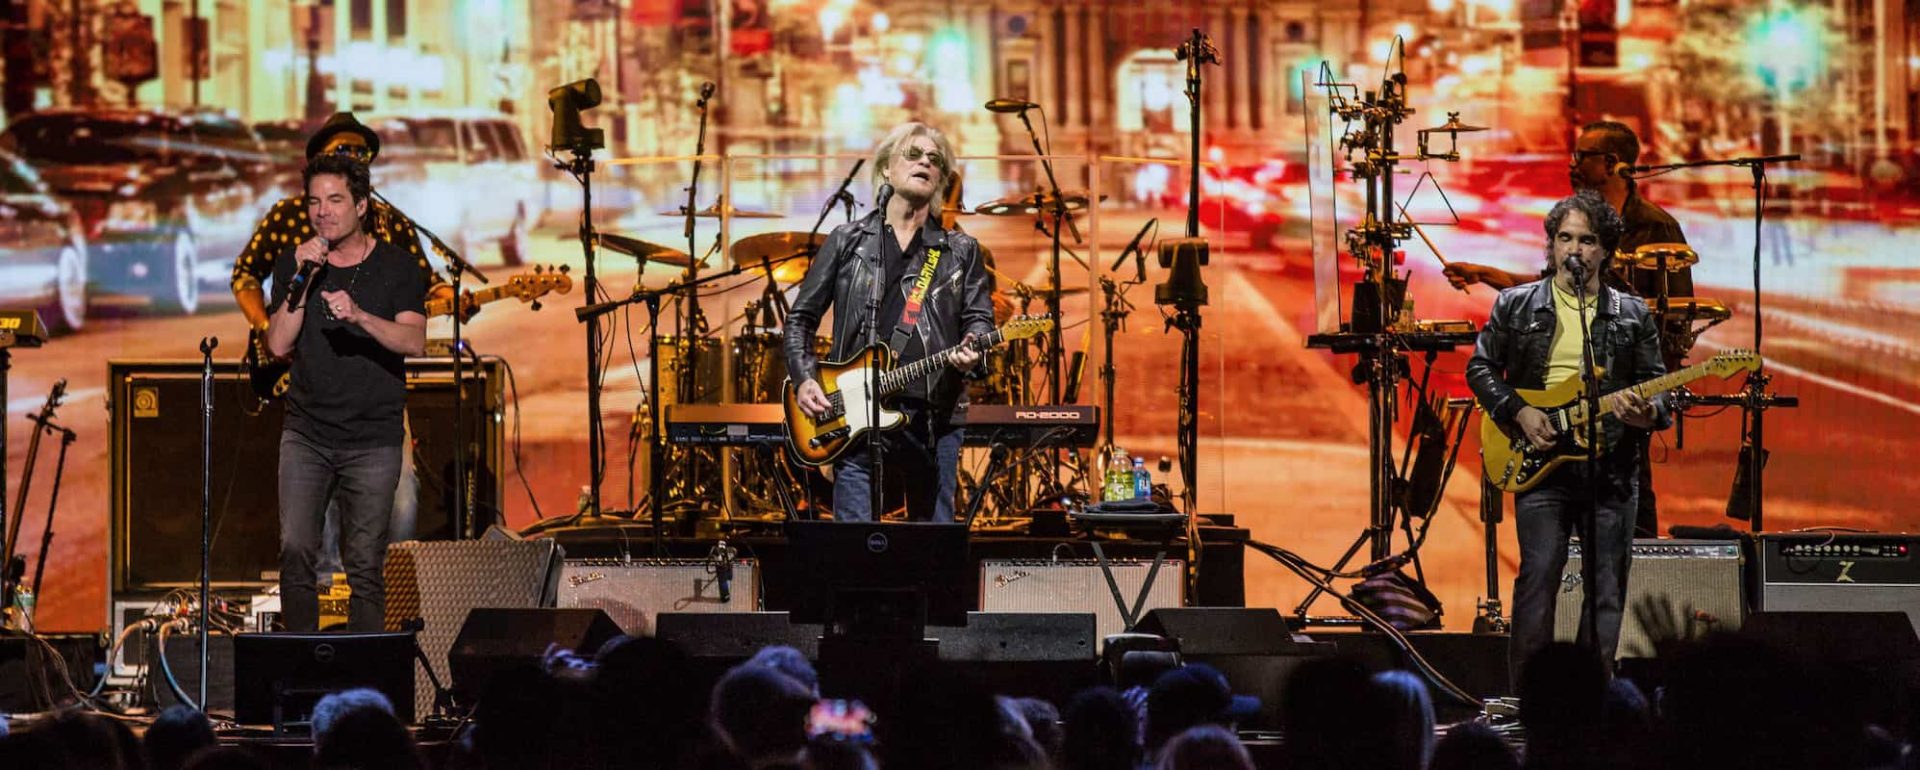 Hall and Oates at Shoreline Amphitheater